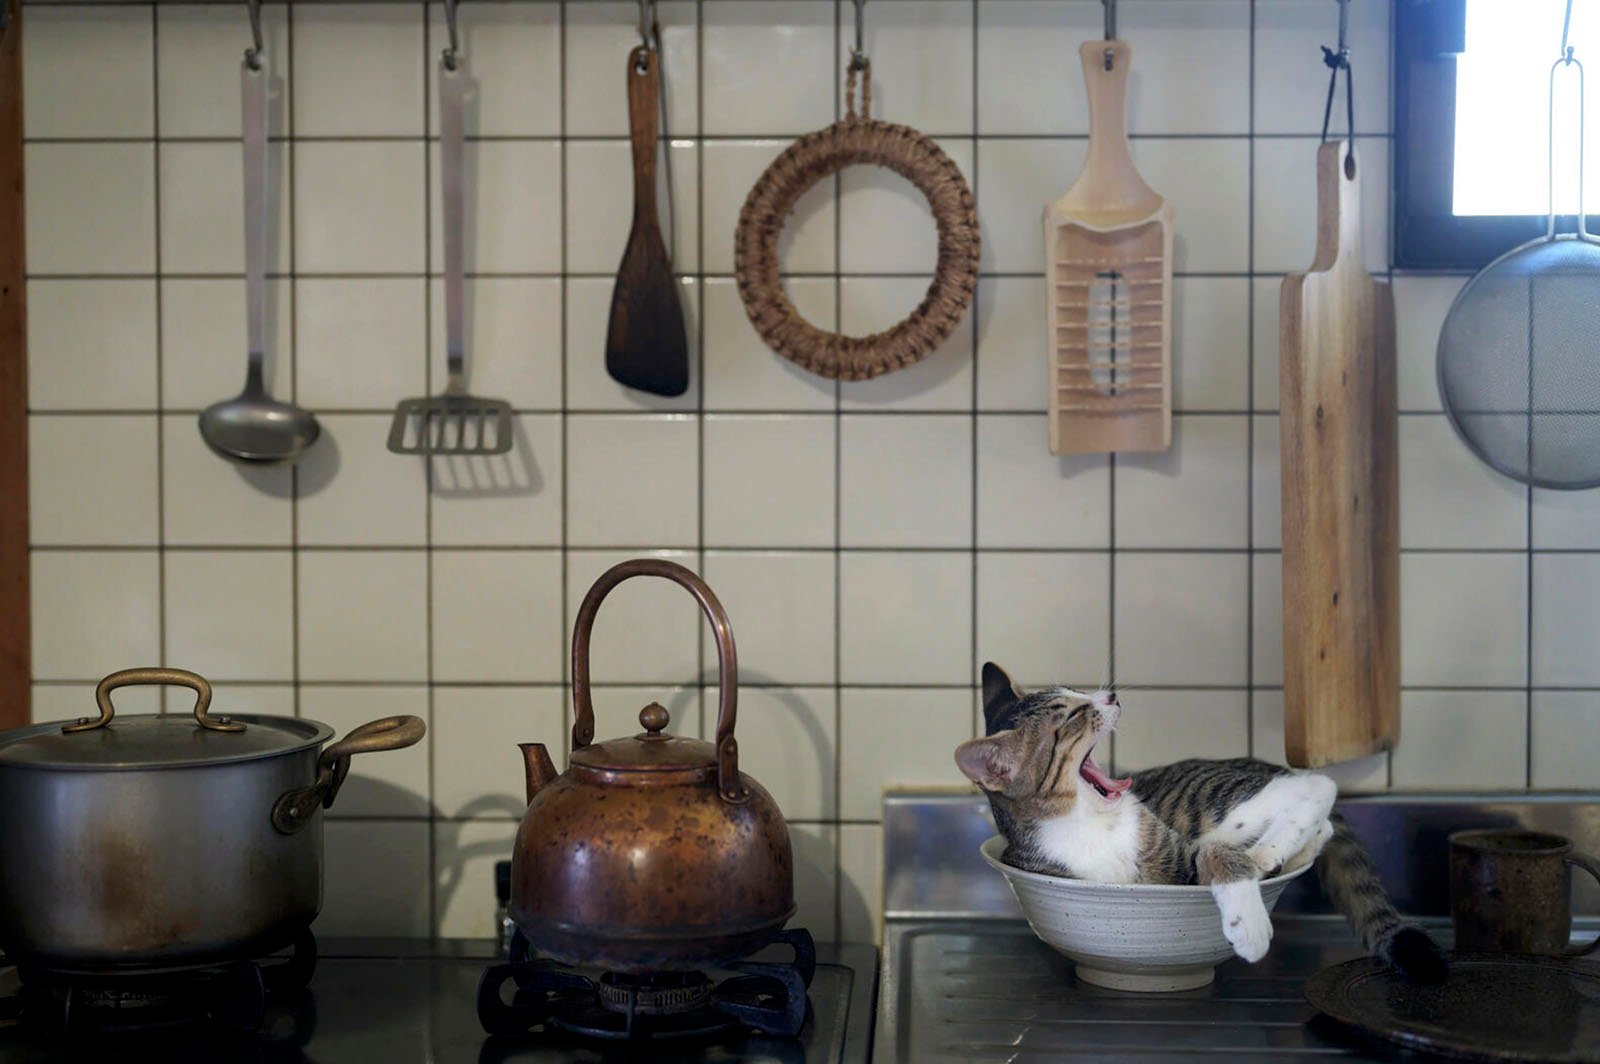 A cozy kitchen counter with hanging utensils and a kitten playfully inside a small woven basket, surrounded by a copper tea kettle and pots.